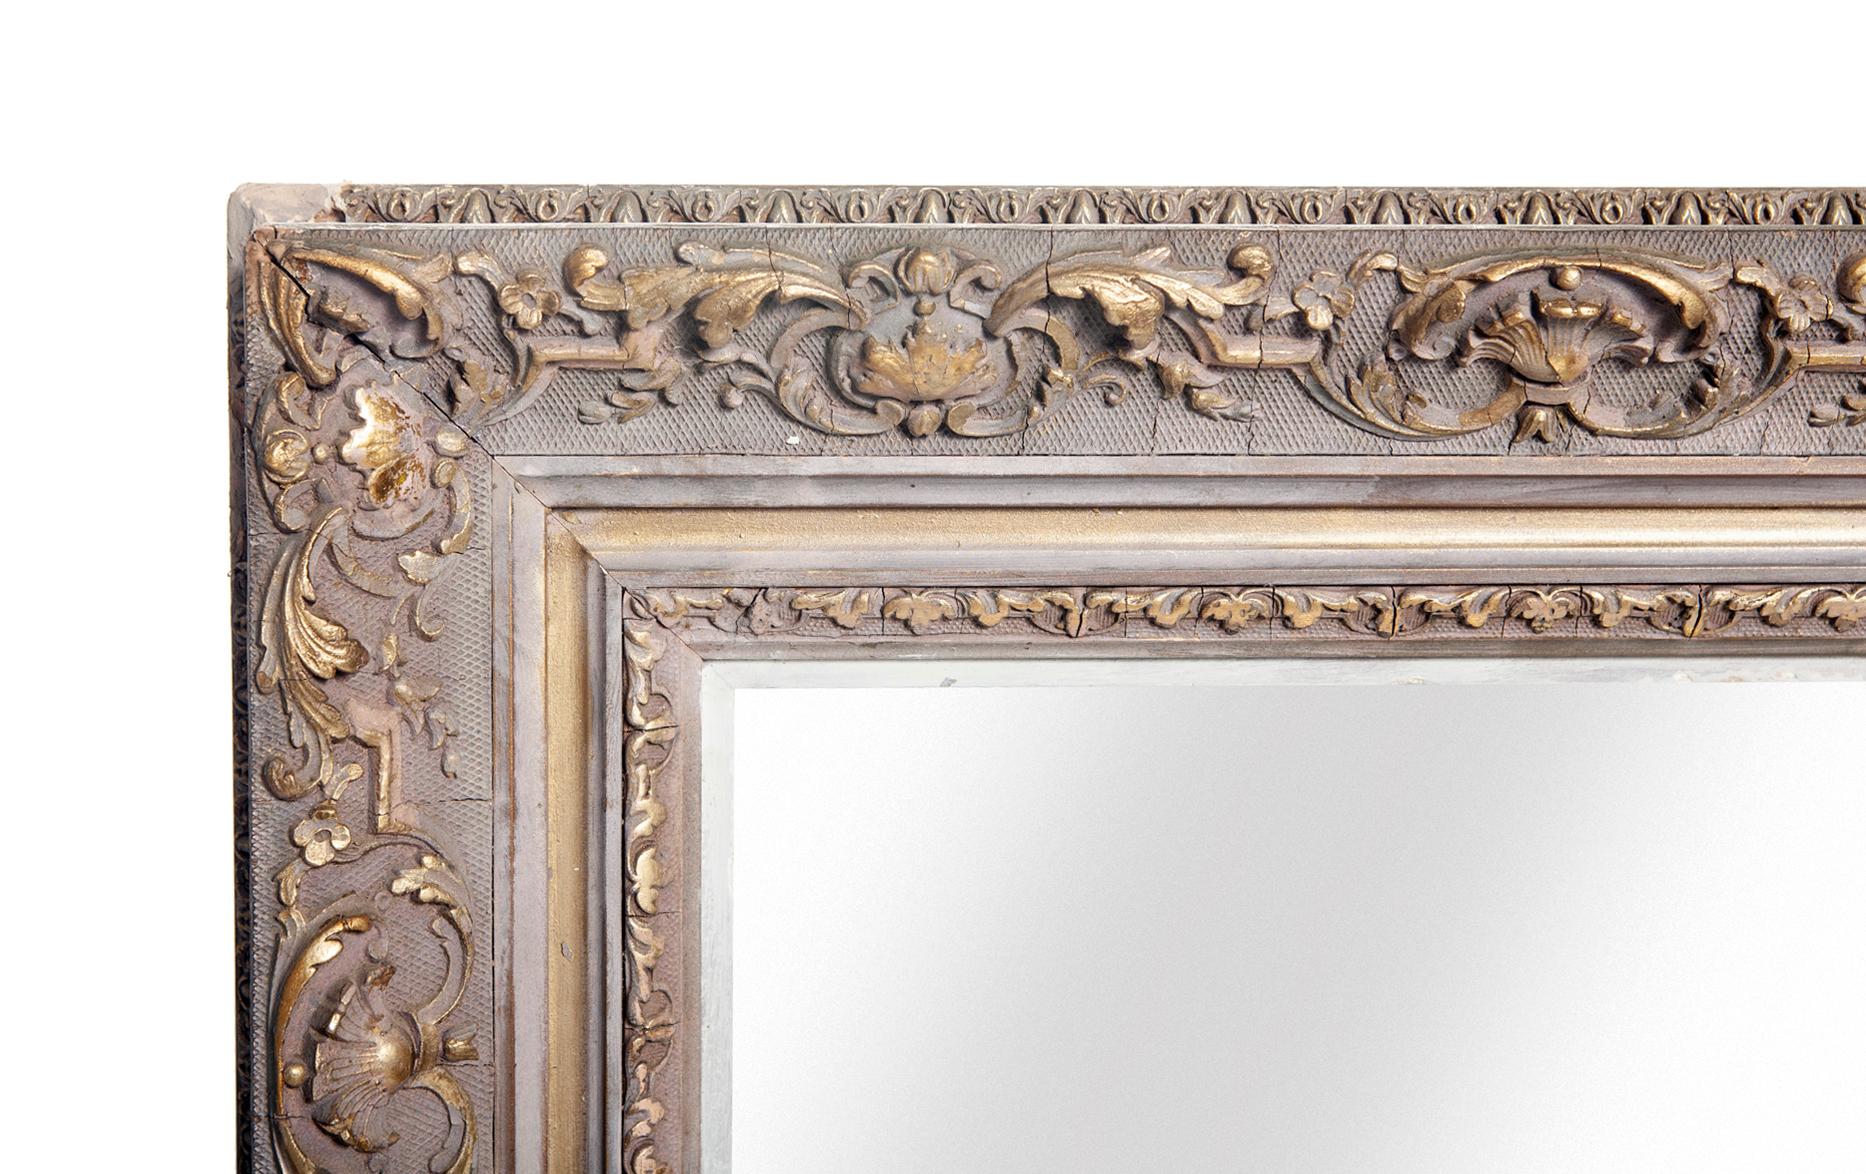 Victorian framed mirror, hand painted frame accent with gold, the beautiful neutral shade is a go anywhere accent piece. New mirror, new backing in marbleized paper. Minor chips have been expertly repaired.
Measures: 2.5